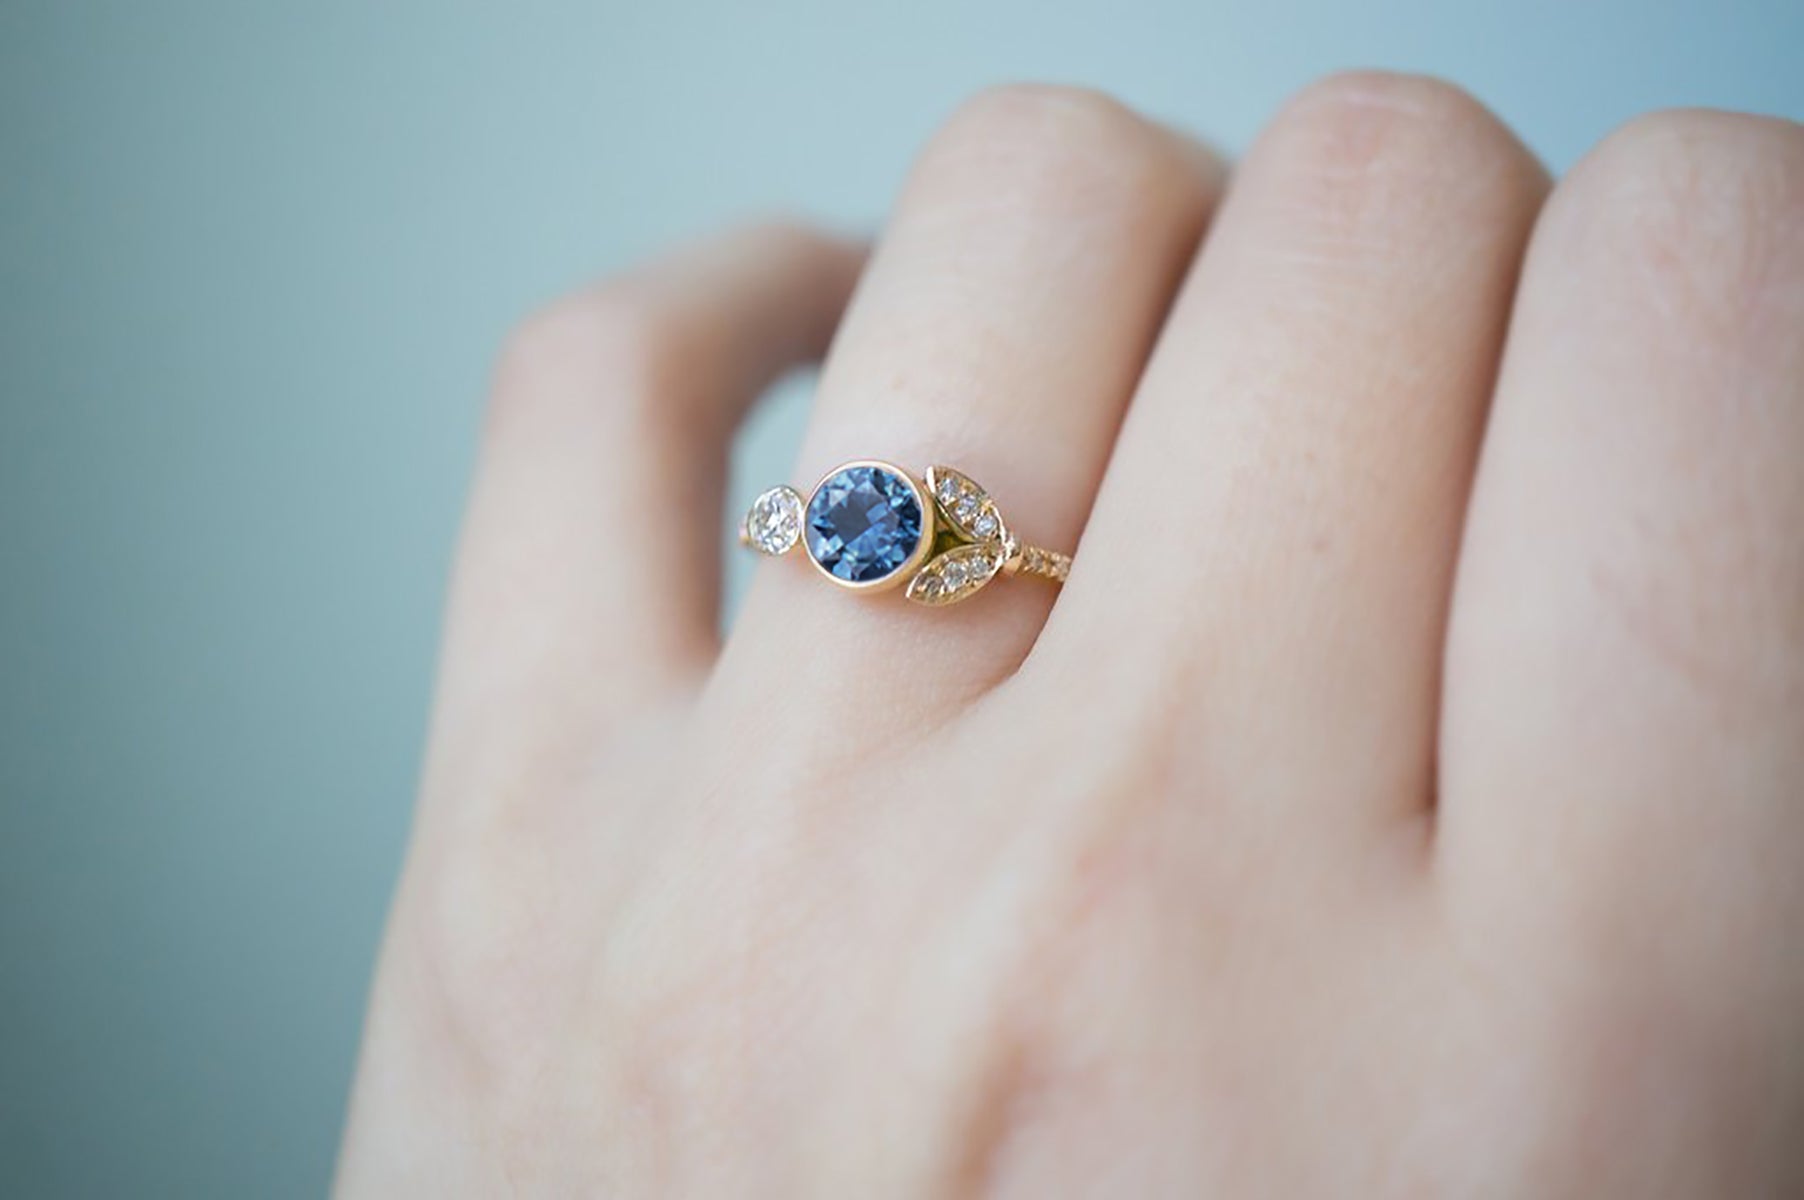 AMERICAN TREASURE MONTANA BLUE SAPPHIRE LUNETTE ENGAGEMENT RING - S. Kind & Co